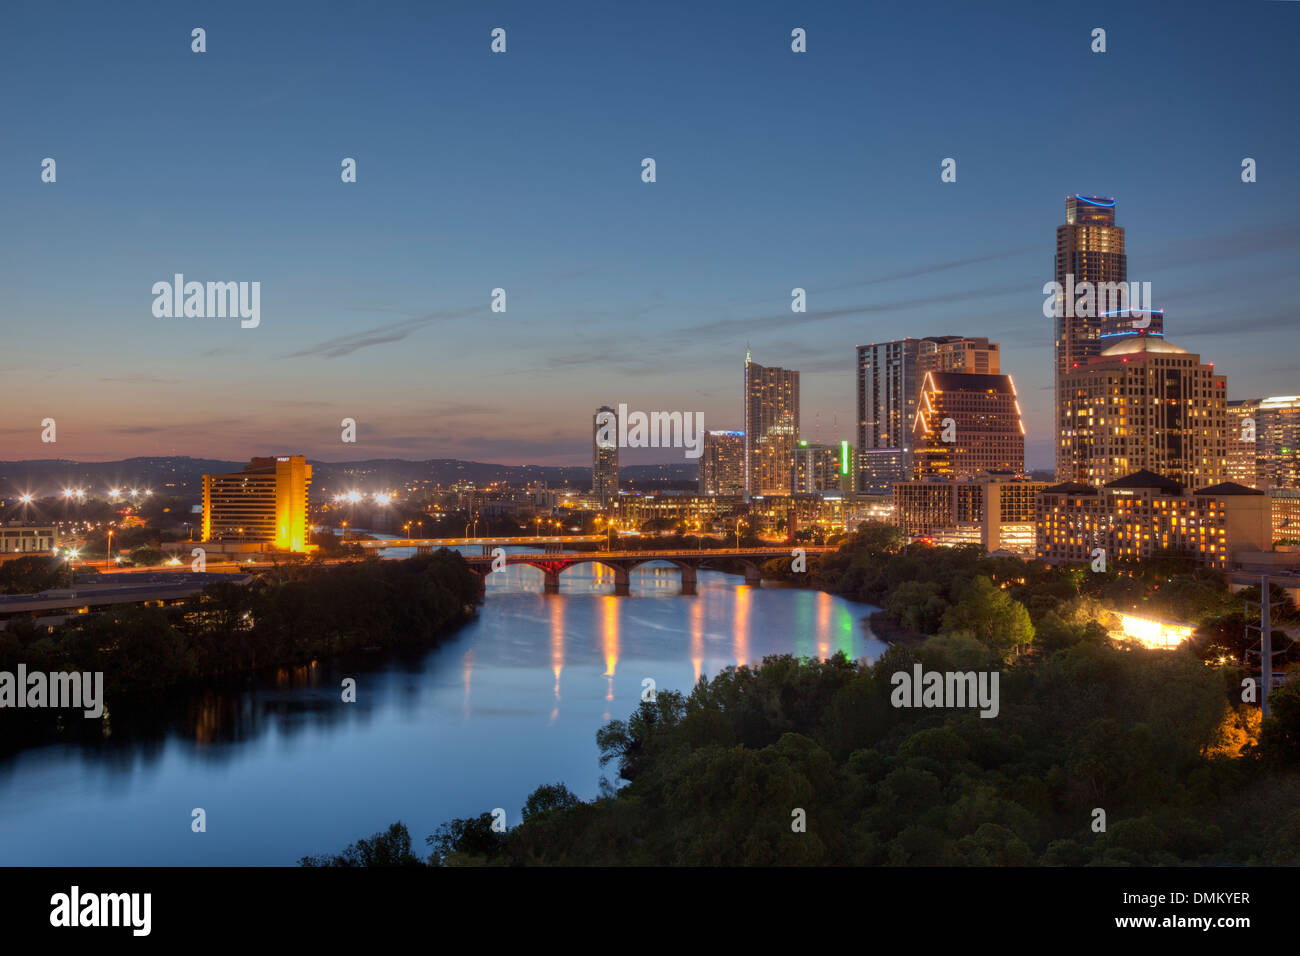 Looking down Lady Bird Lake to the west, you have a great view of the Austin Skyline and Congress Bridge. Stock Photo